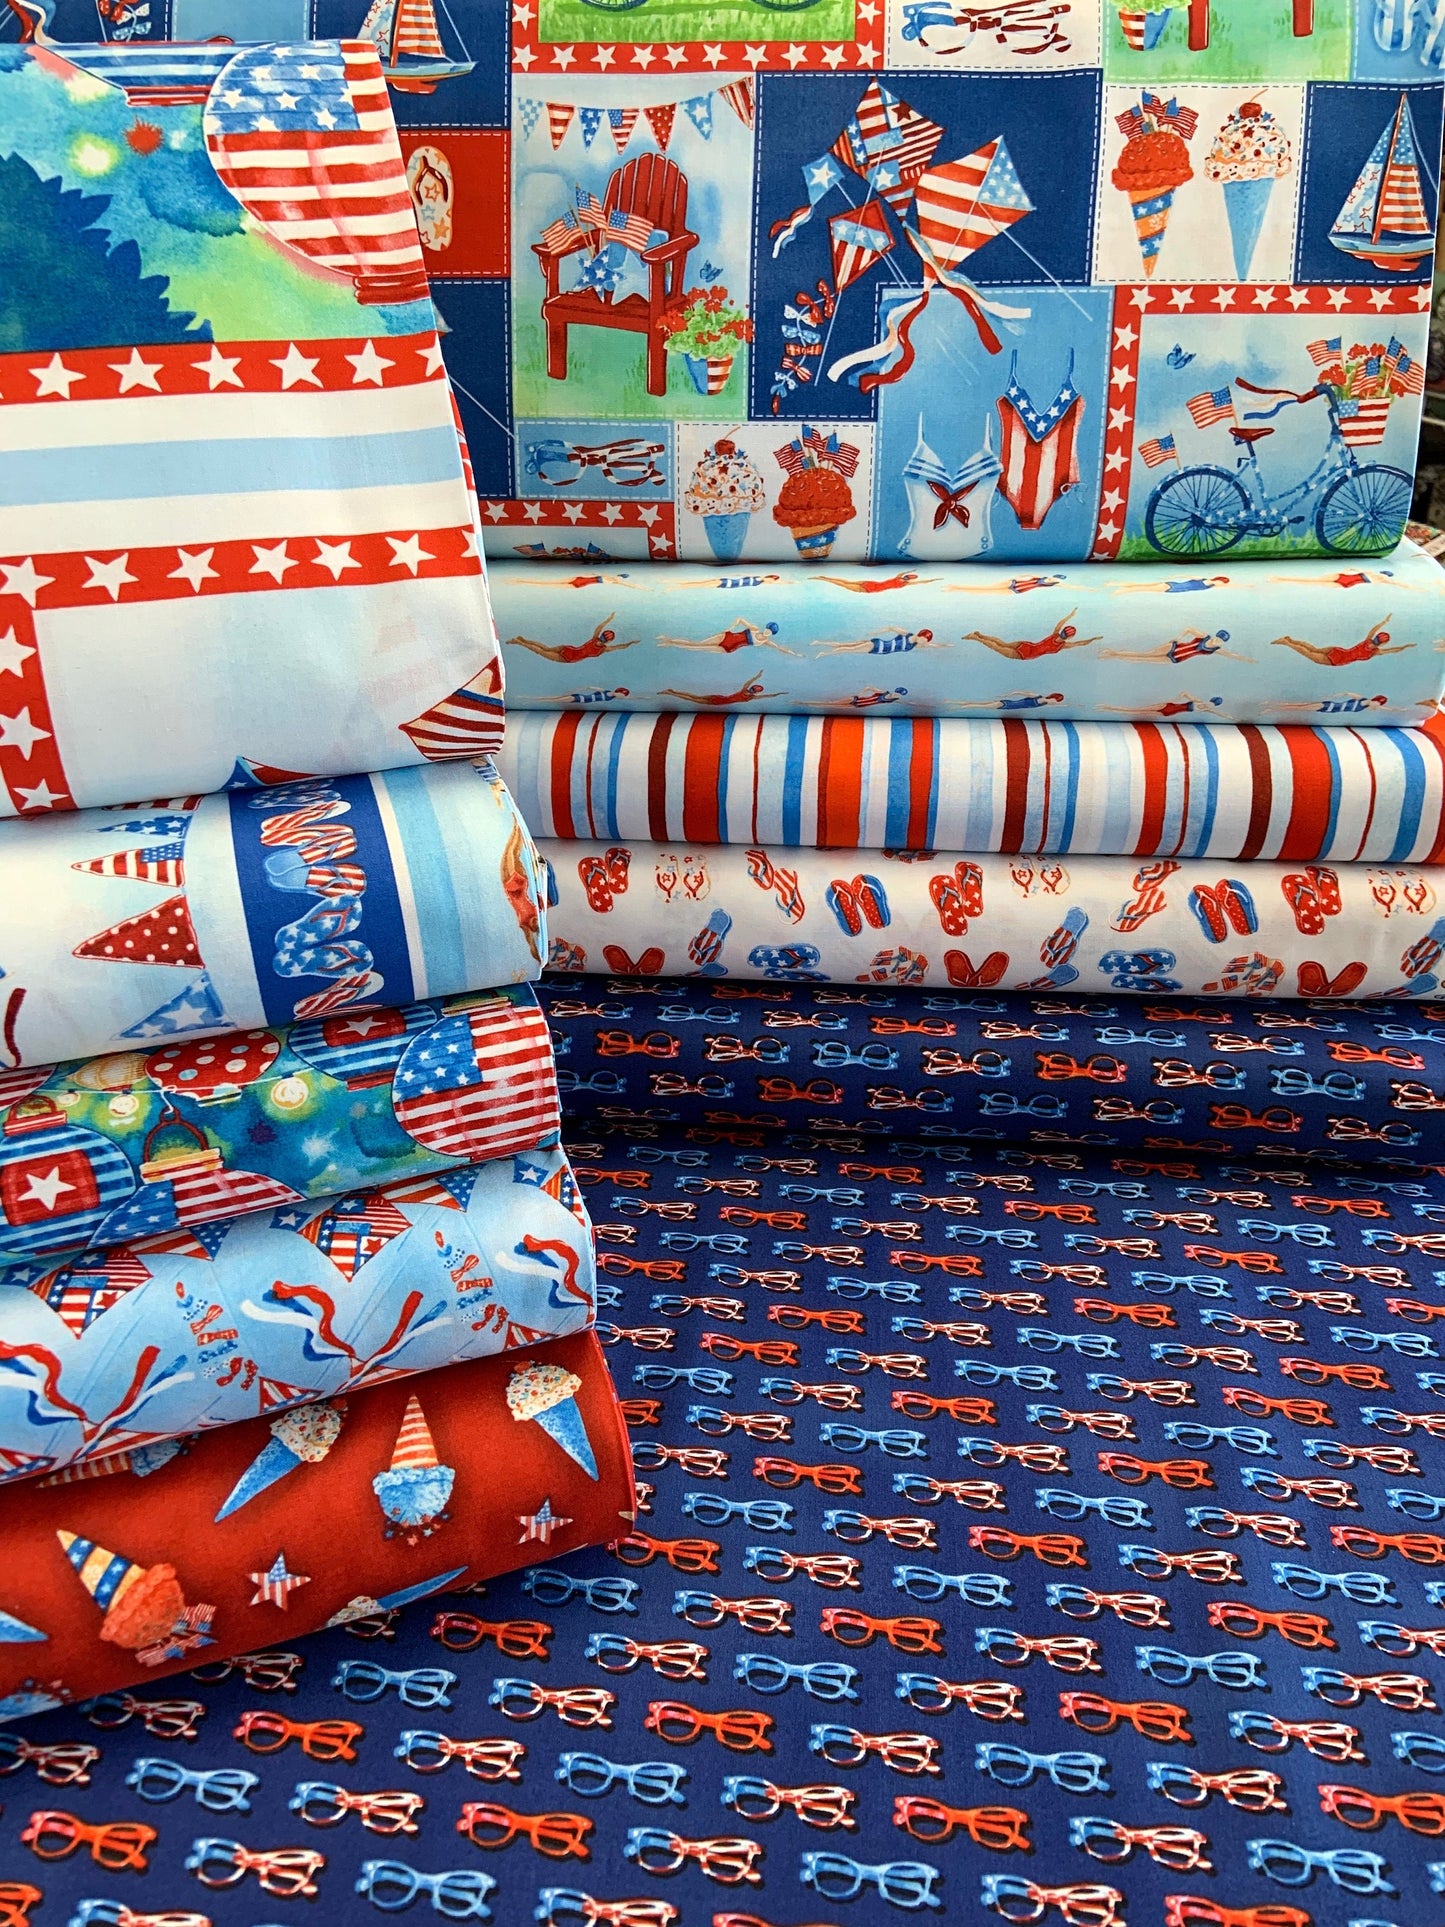 Star Spangled Summer by Andrea Tachiera Summer Motifs in Patchwork 9030-78 Cotton Woven Fabric